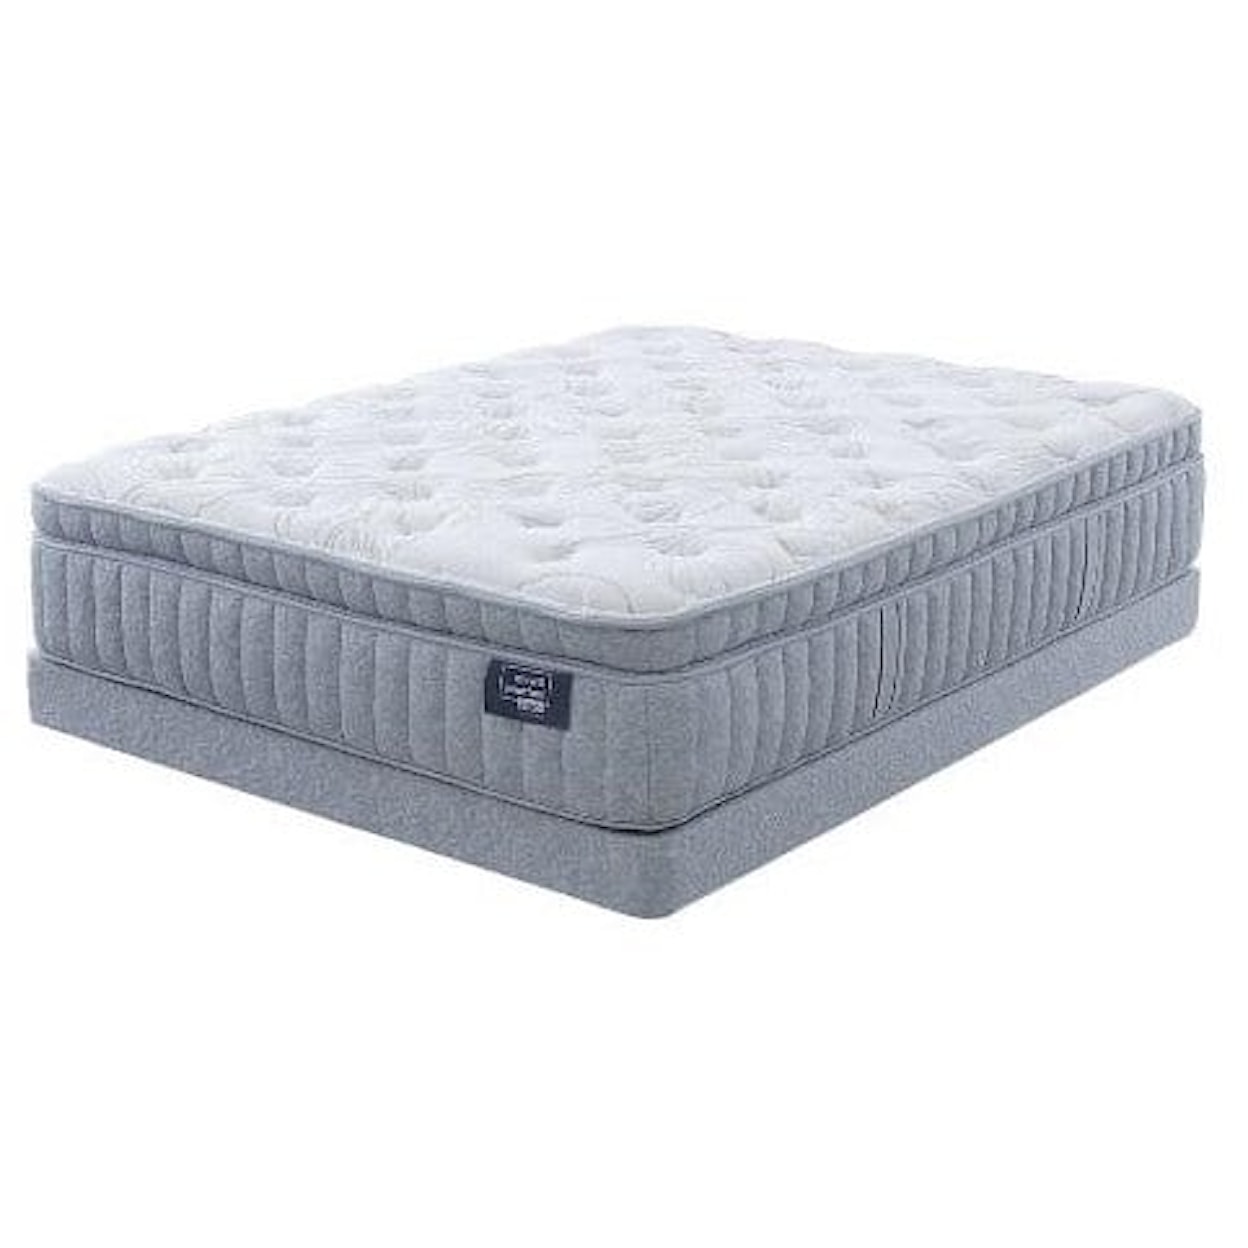 Drew & Jonathan Home by Restonic Mattress Bellflower Extra Firm King Extra Firm Low Profile